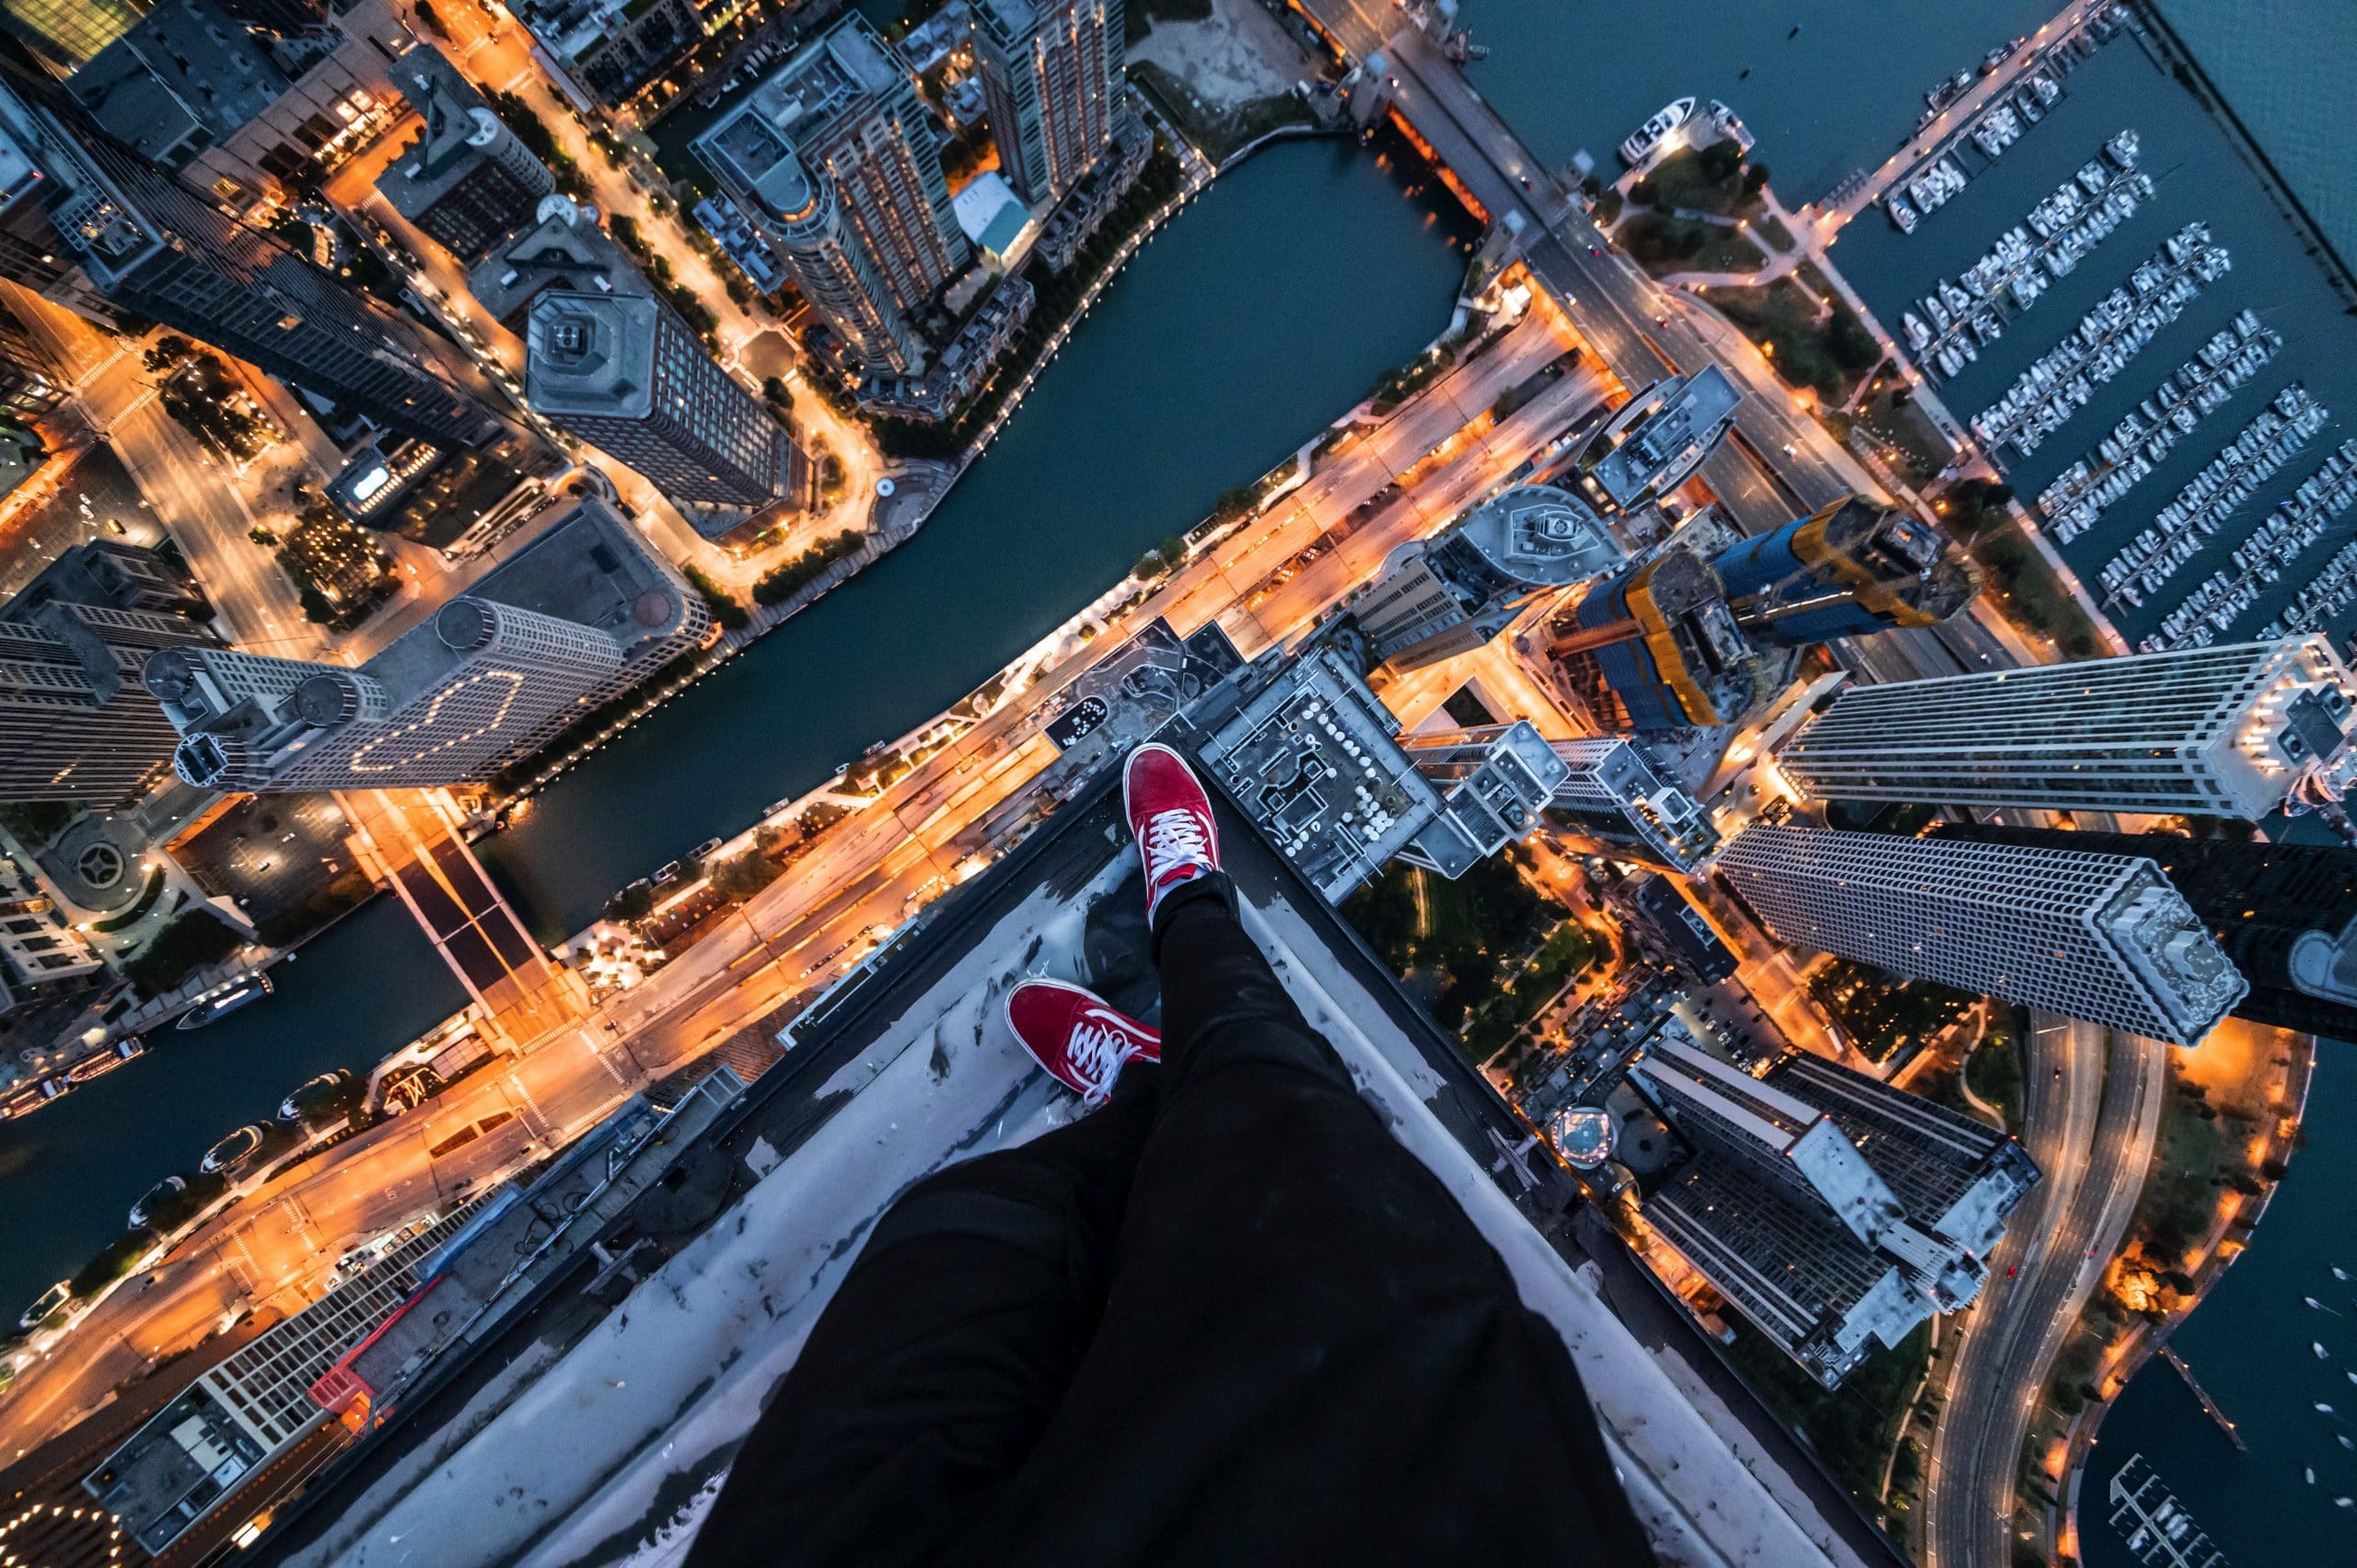 Photograph of a man wearing red vans standing on top of a skyscraper